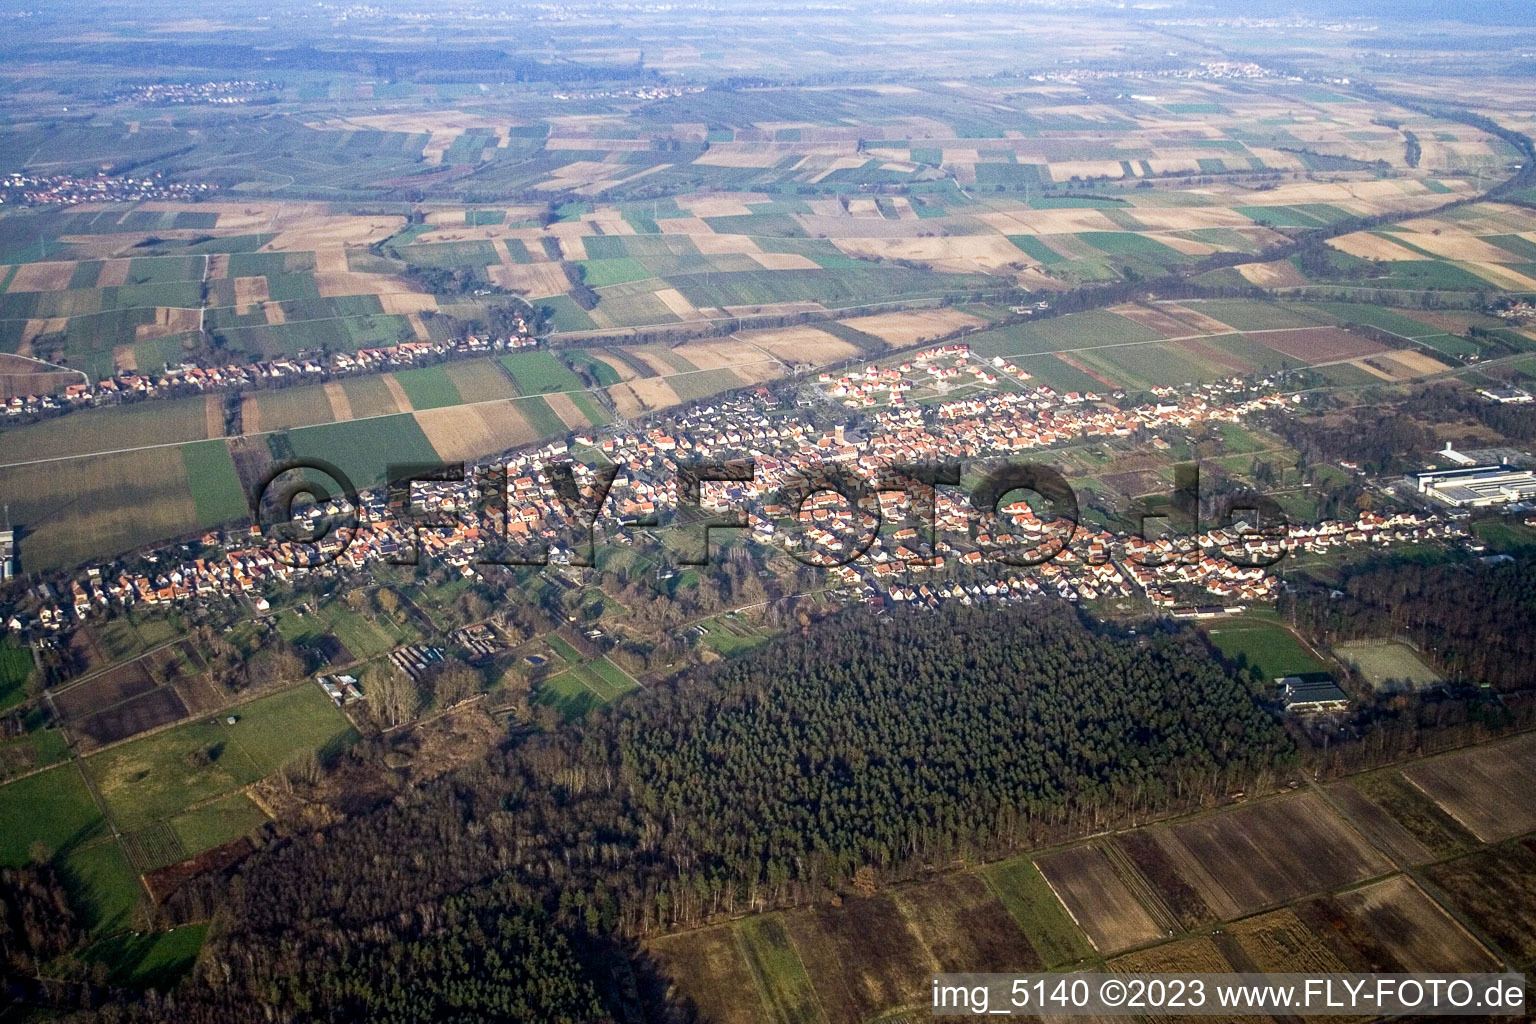 Aerial view of From the southwest in the district Schaidt in Wörth am Rhein in the state Rhineland-Palatinate, Germany